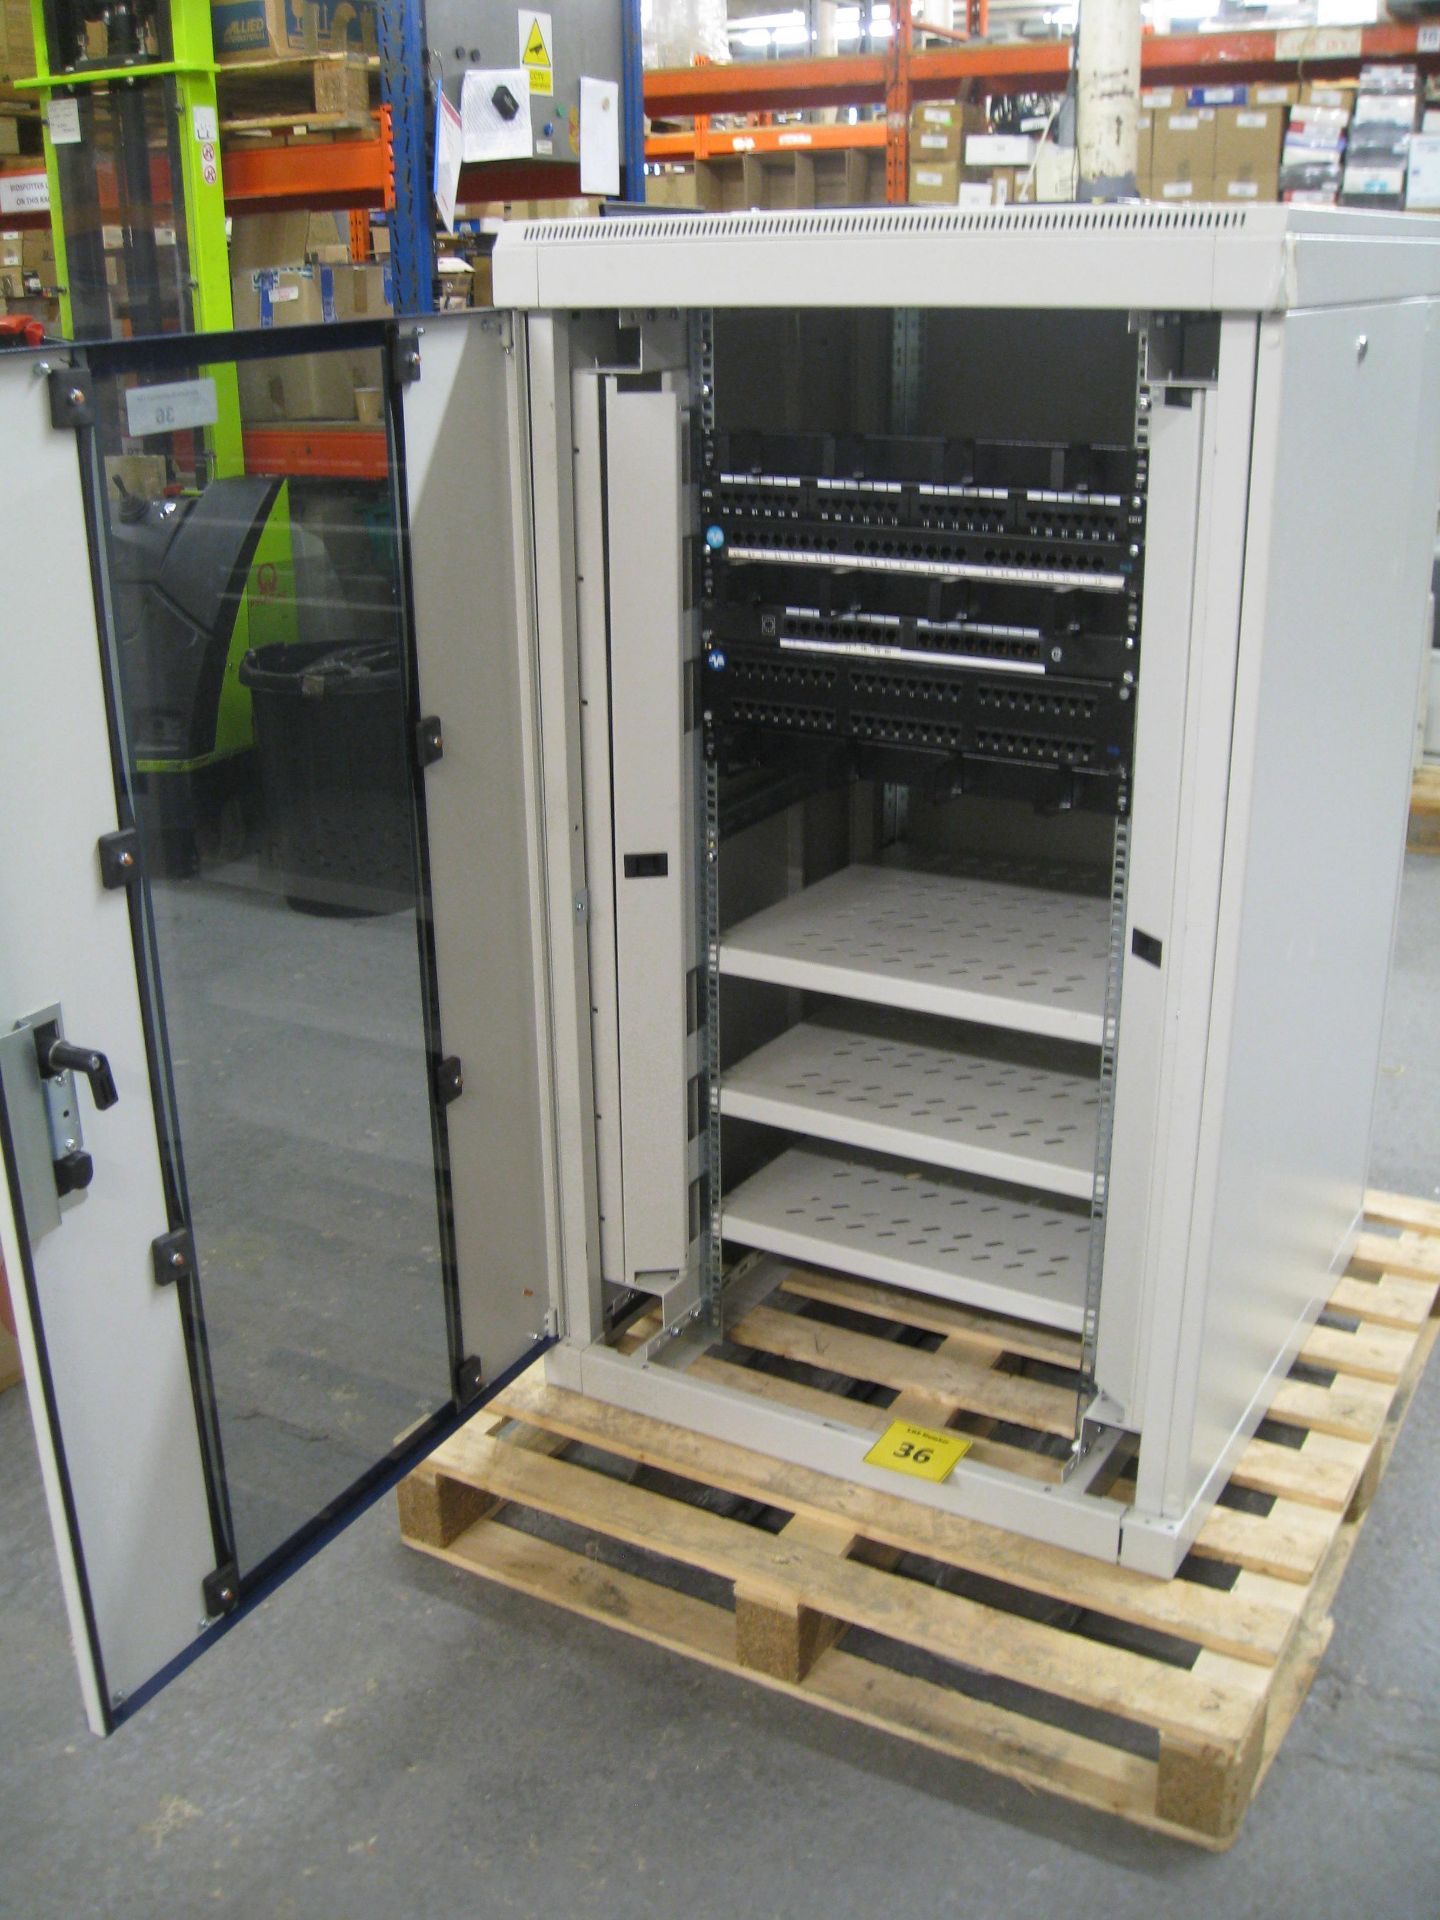 COMMS CABINET. 127CM TALL, 78CM WIDE & 82CM DEEP. WITH 3 SHELVES, 4 X PATCH PANELS AND FAN PANE;L ON - Bild 2 aus 3